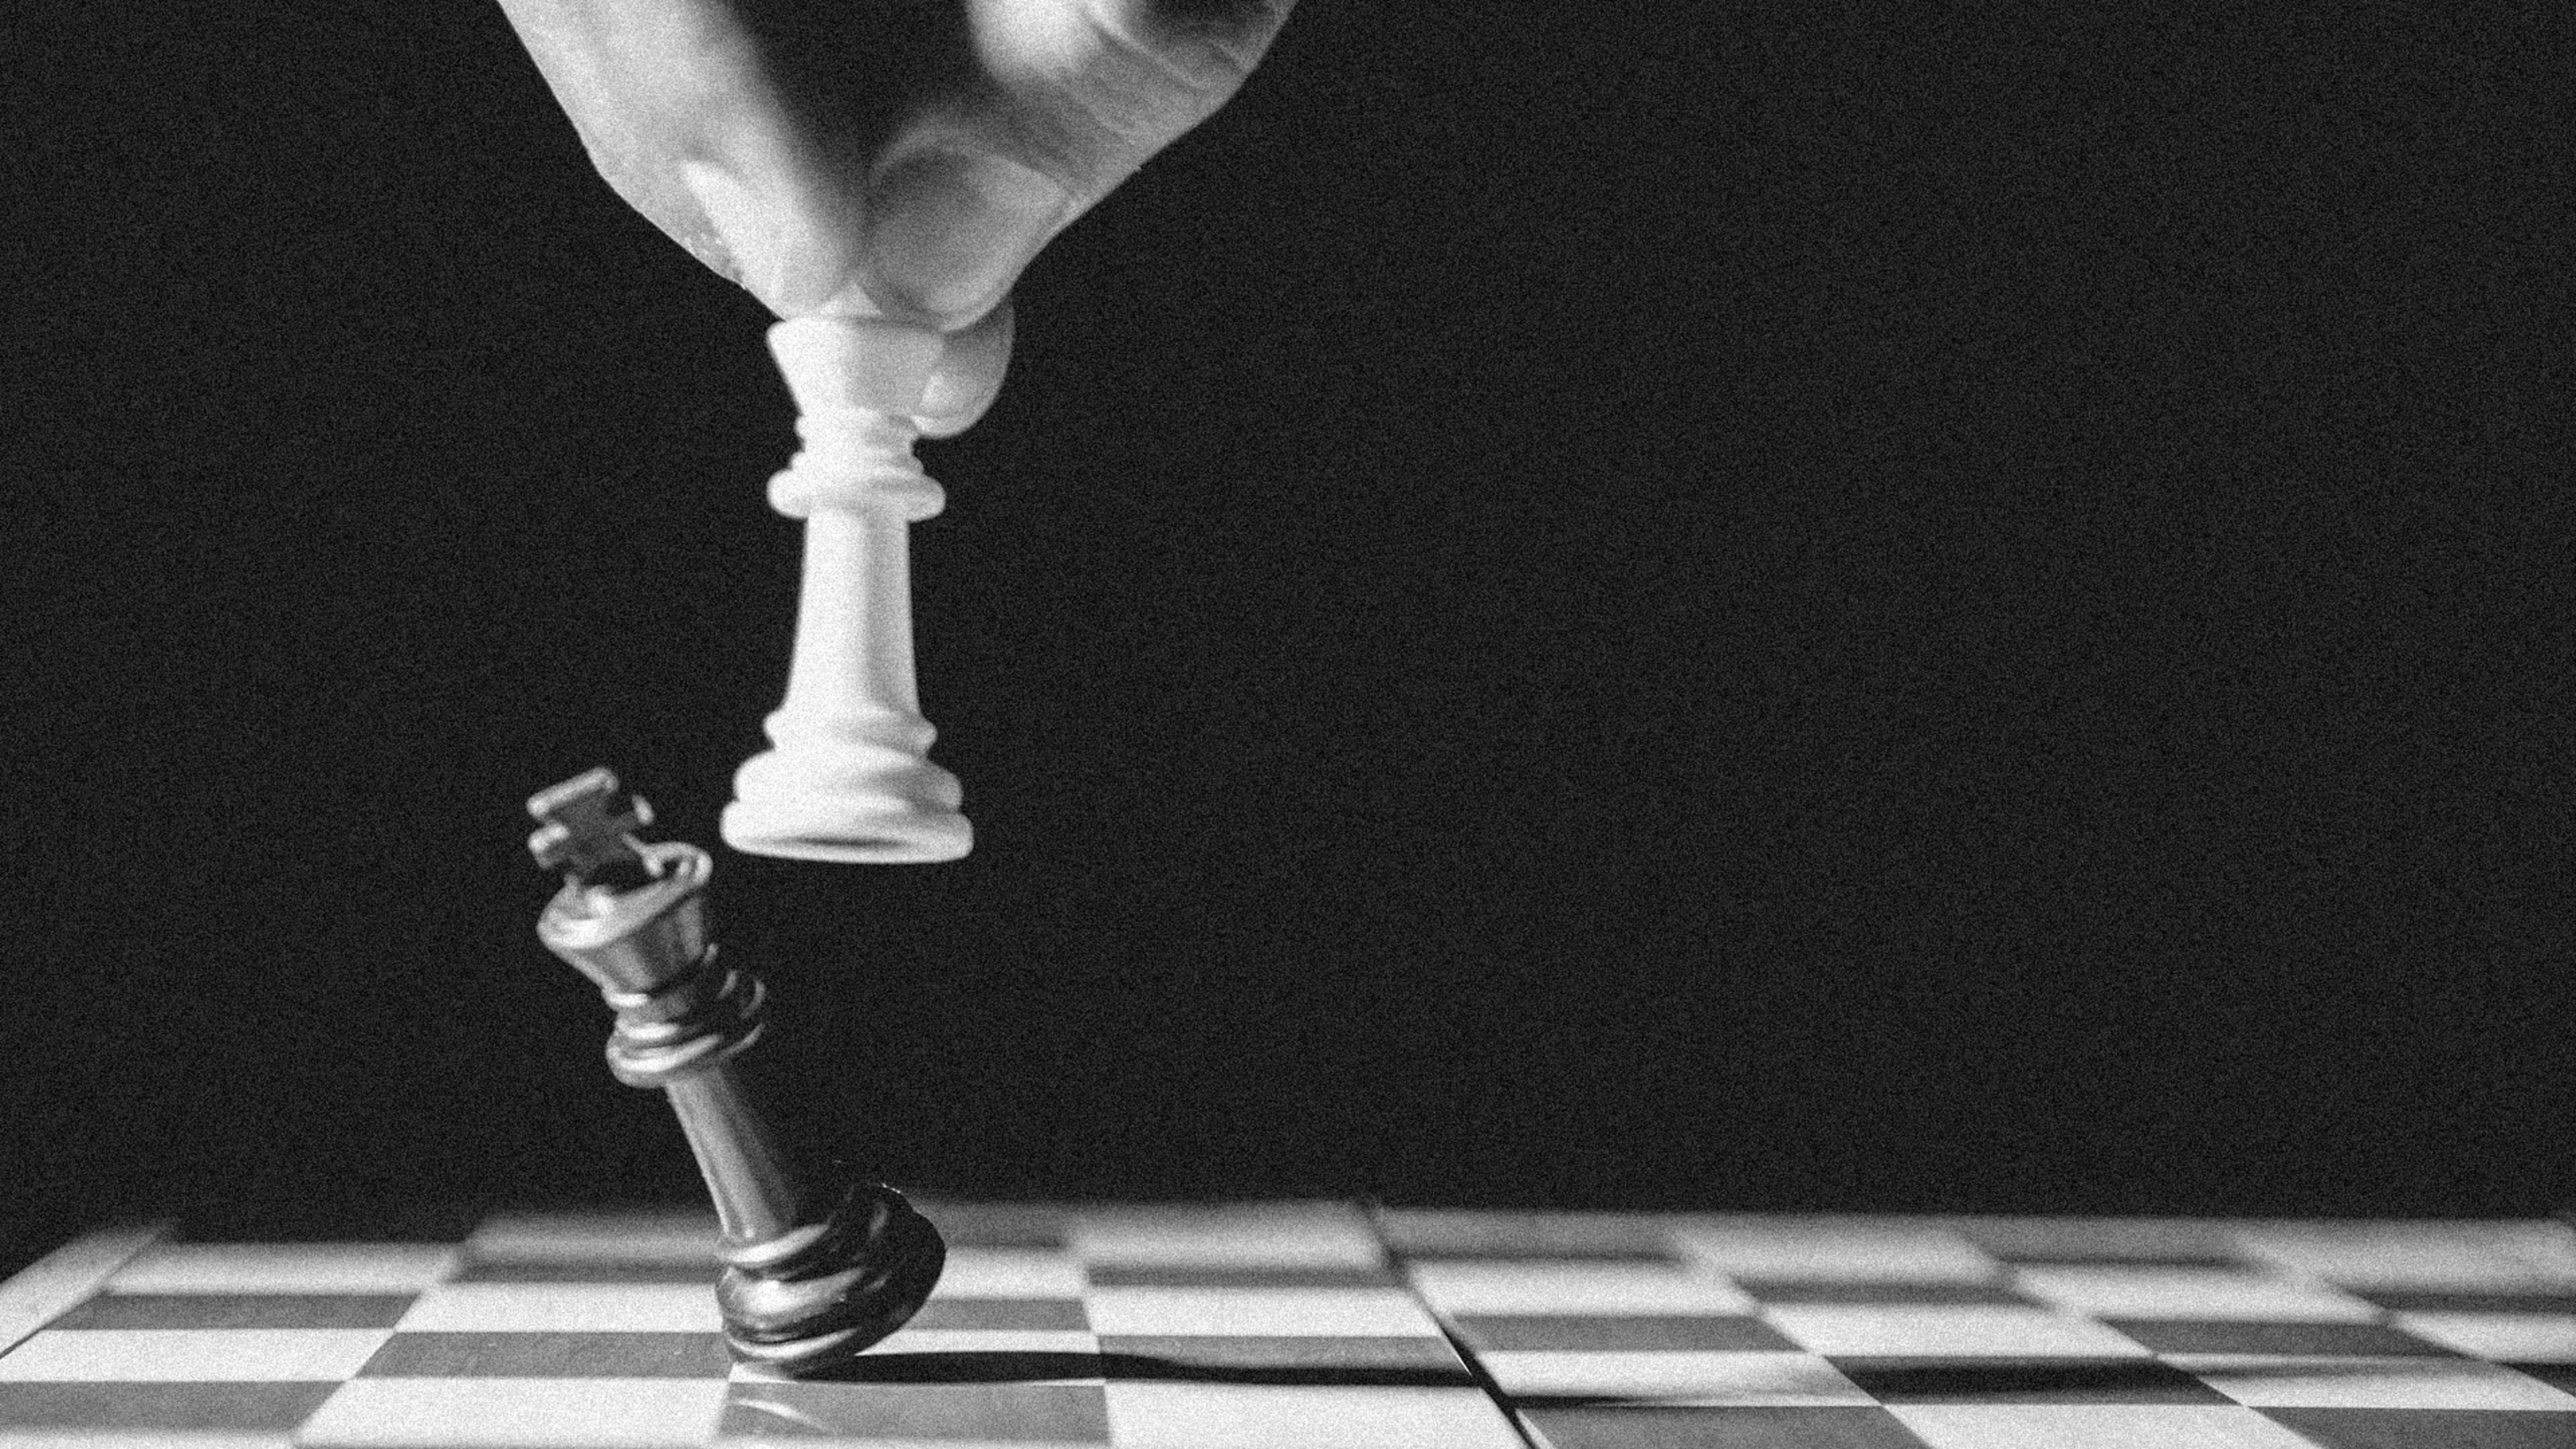 Leadership lessons from a chess master: Beware overconfidence